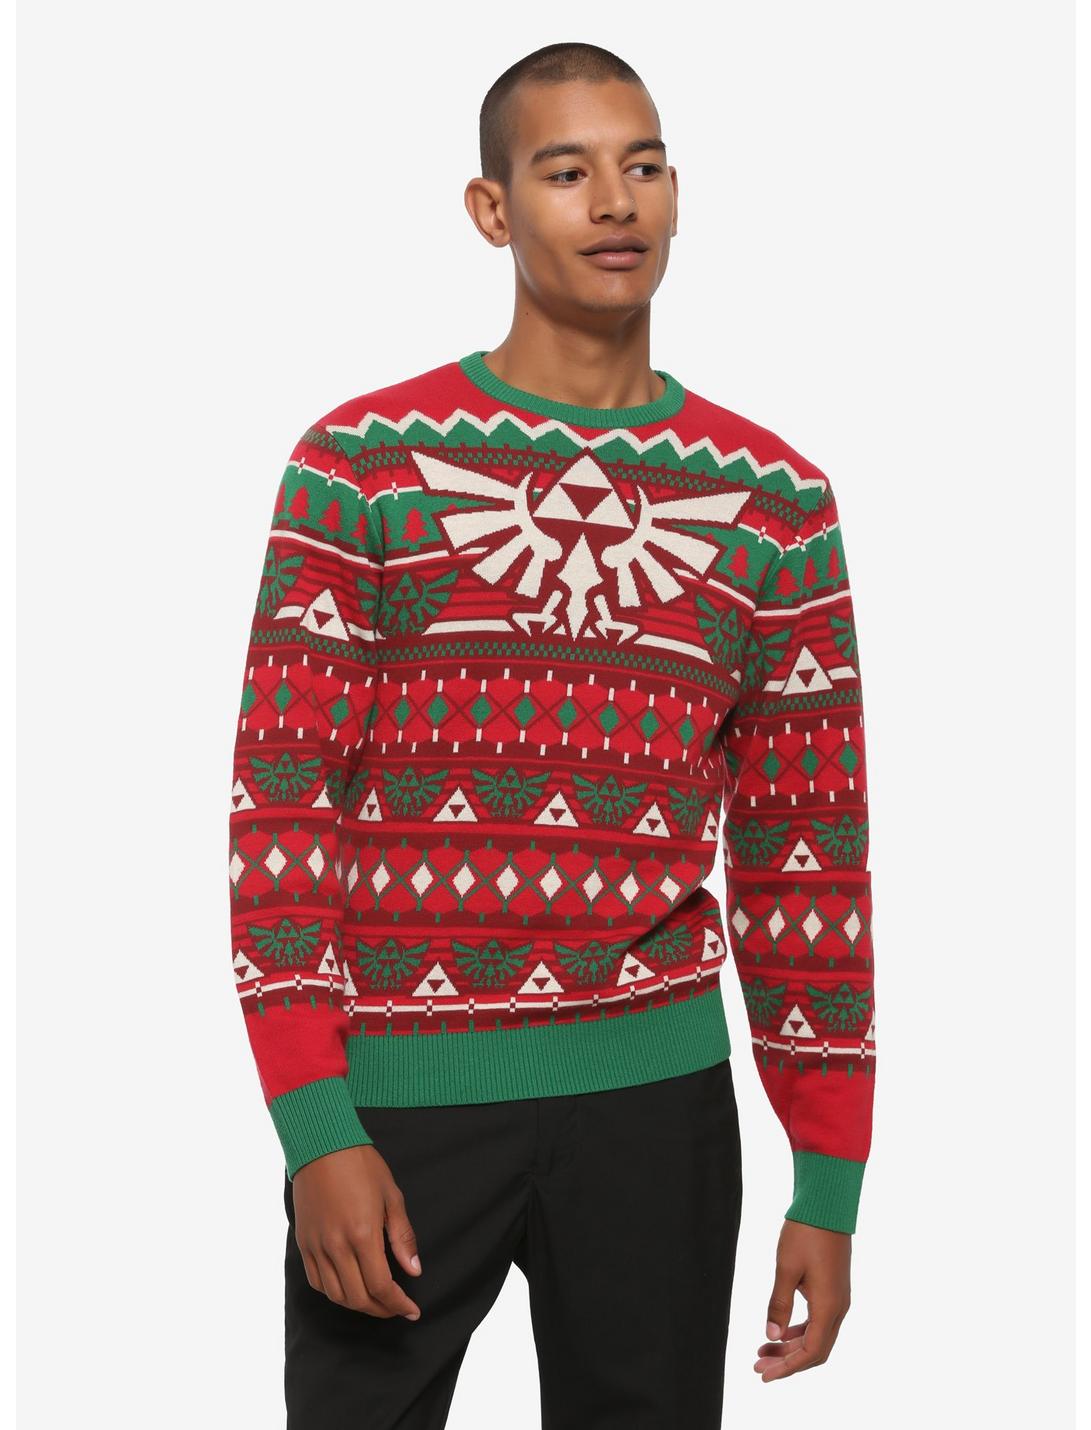 Nintendo The Legend of Zelda Emblem Ugly Holiday Sweater - BoxLunch Exclusive, MULTI, hi-res